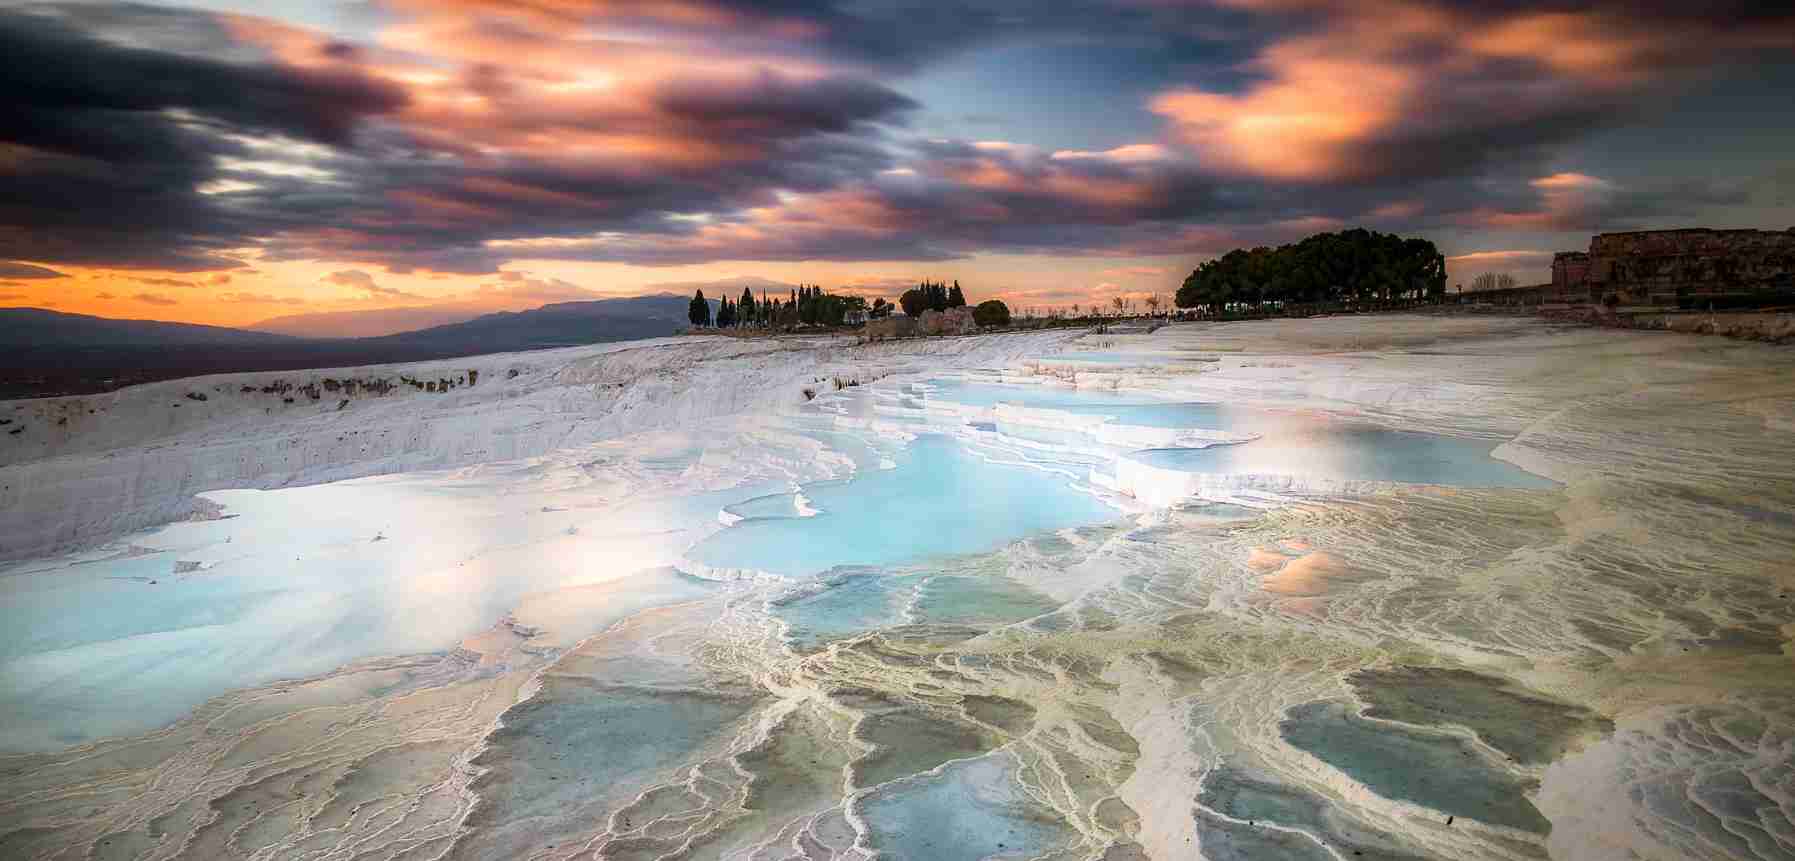 Pamukkale: Cotton Castle of Thermal Pools